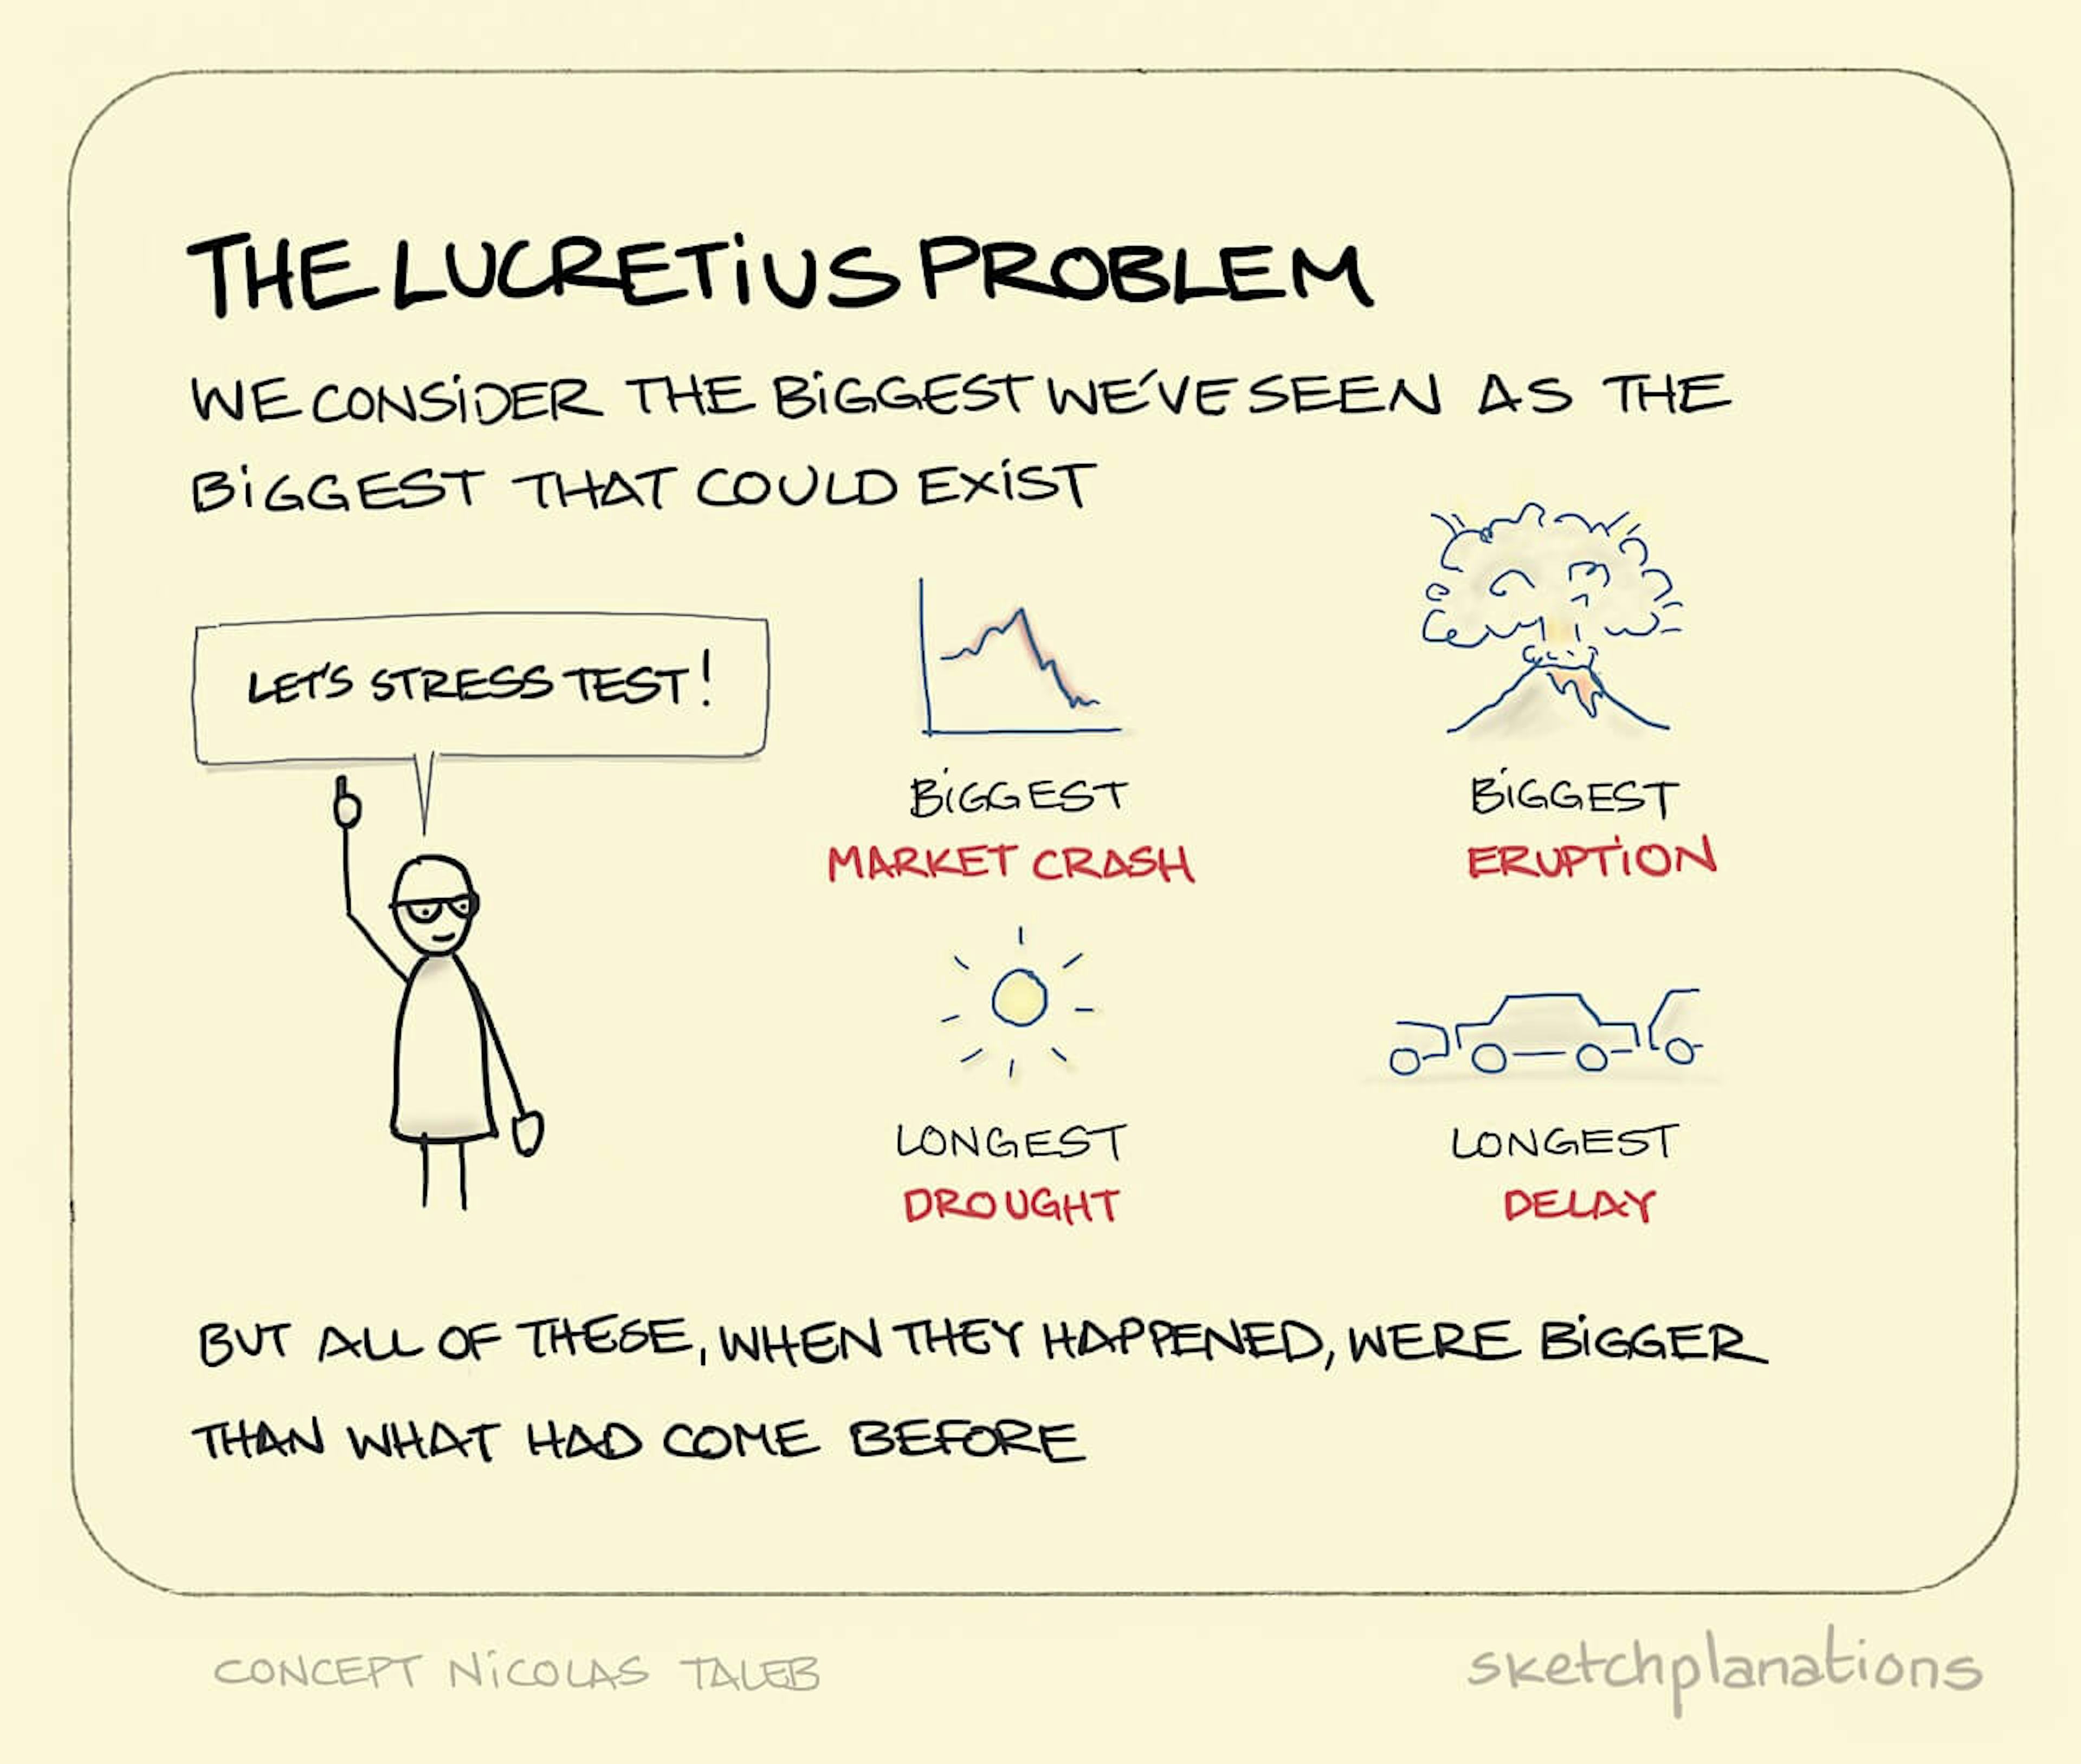 The Lucretius Problem illustration: examples of the biggest occurrences in history, like a market crash, a volcano eruption, a long drought and a traffic delay tend to be perceived as the biggest there could ever be. 